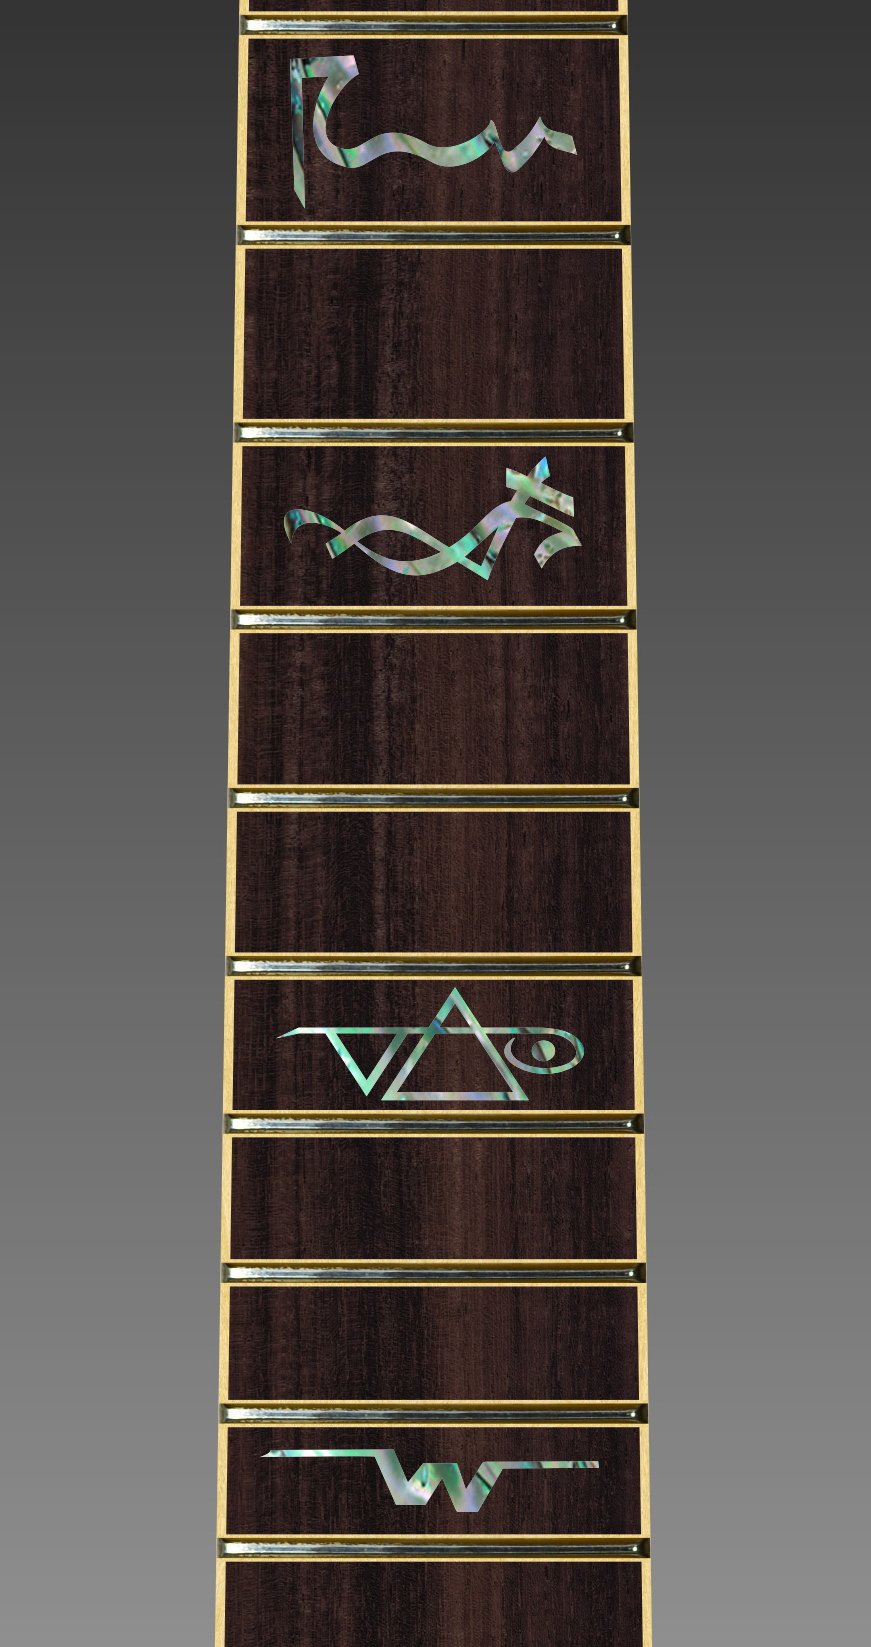  close up image of a guitar neck against a grey background. there is a fret protector on the guitar. It is a dark wood color with blue and grey multi-color symbols on nearly every other fret. One fret has the steve vai logo on it. The steve vai logo makes the word "vai" with an upside down triangle, a right side up one, and a line going across the triangles with a curl at the end next to the triangle that is upright. 